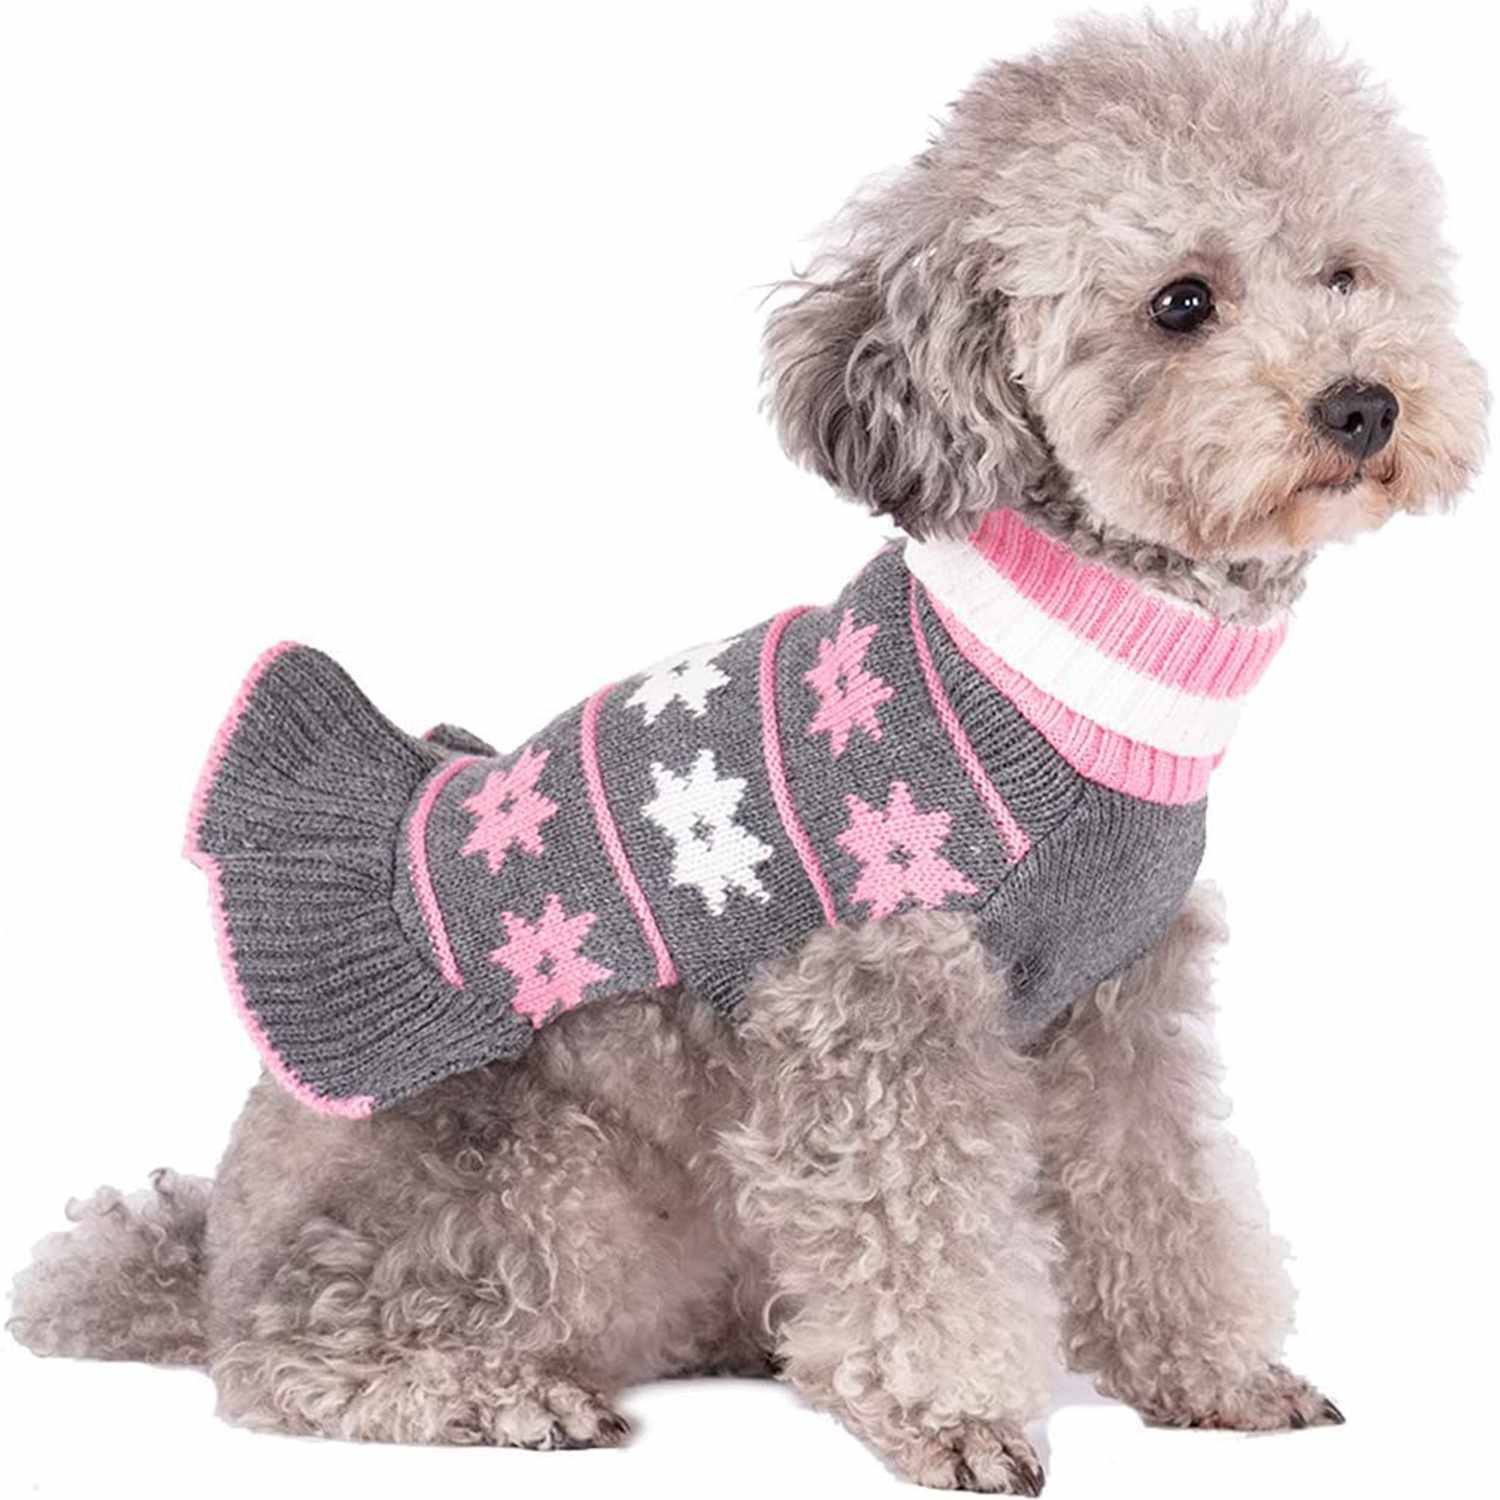 YUSENPET Pet Dog Puppy Classic Sweater Coat Tops Fleece Warm Winter Knitwear Clothes for Small Medium Dogs